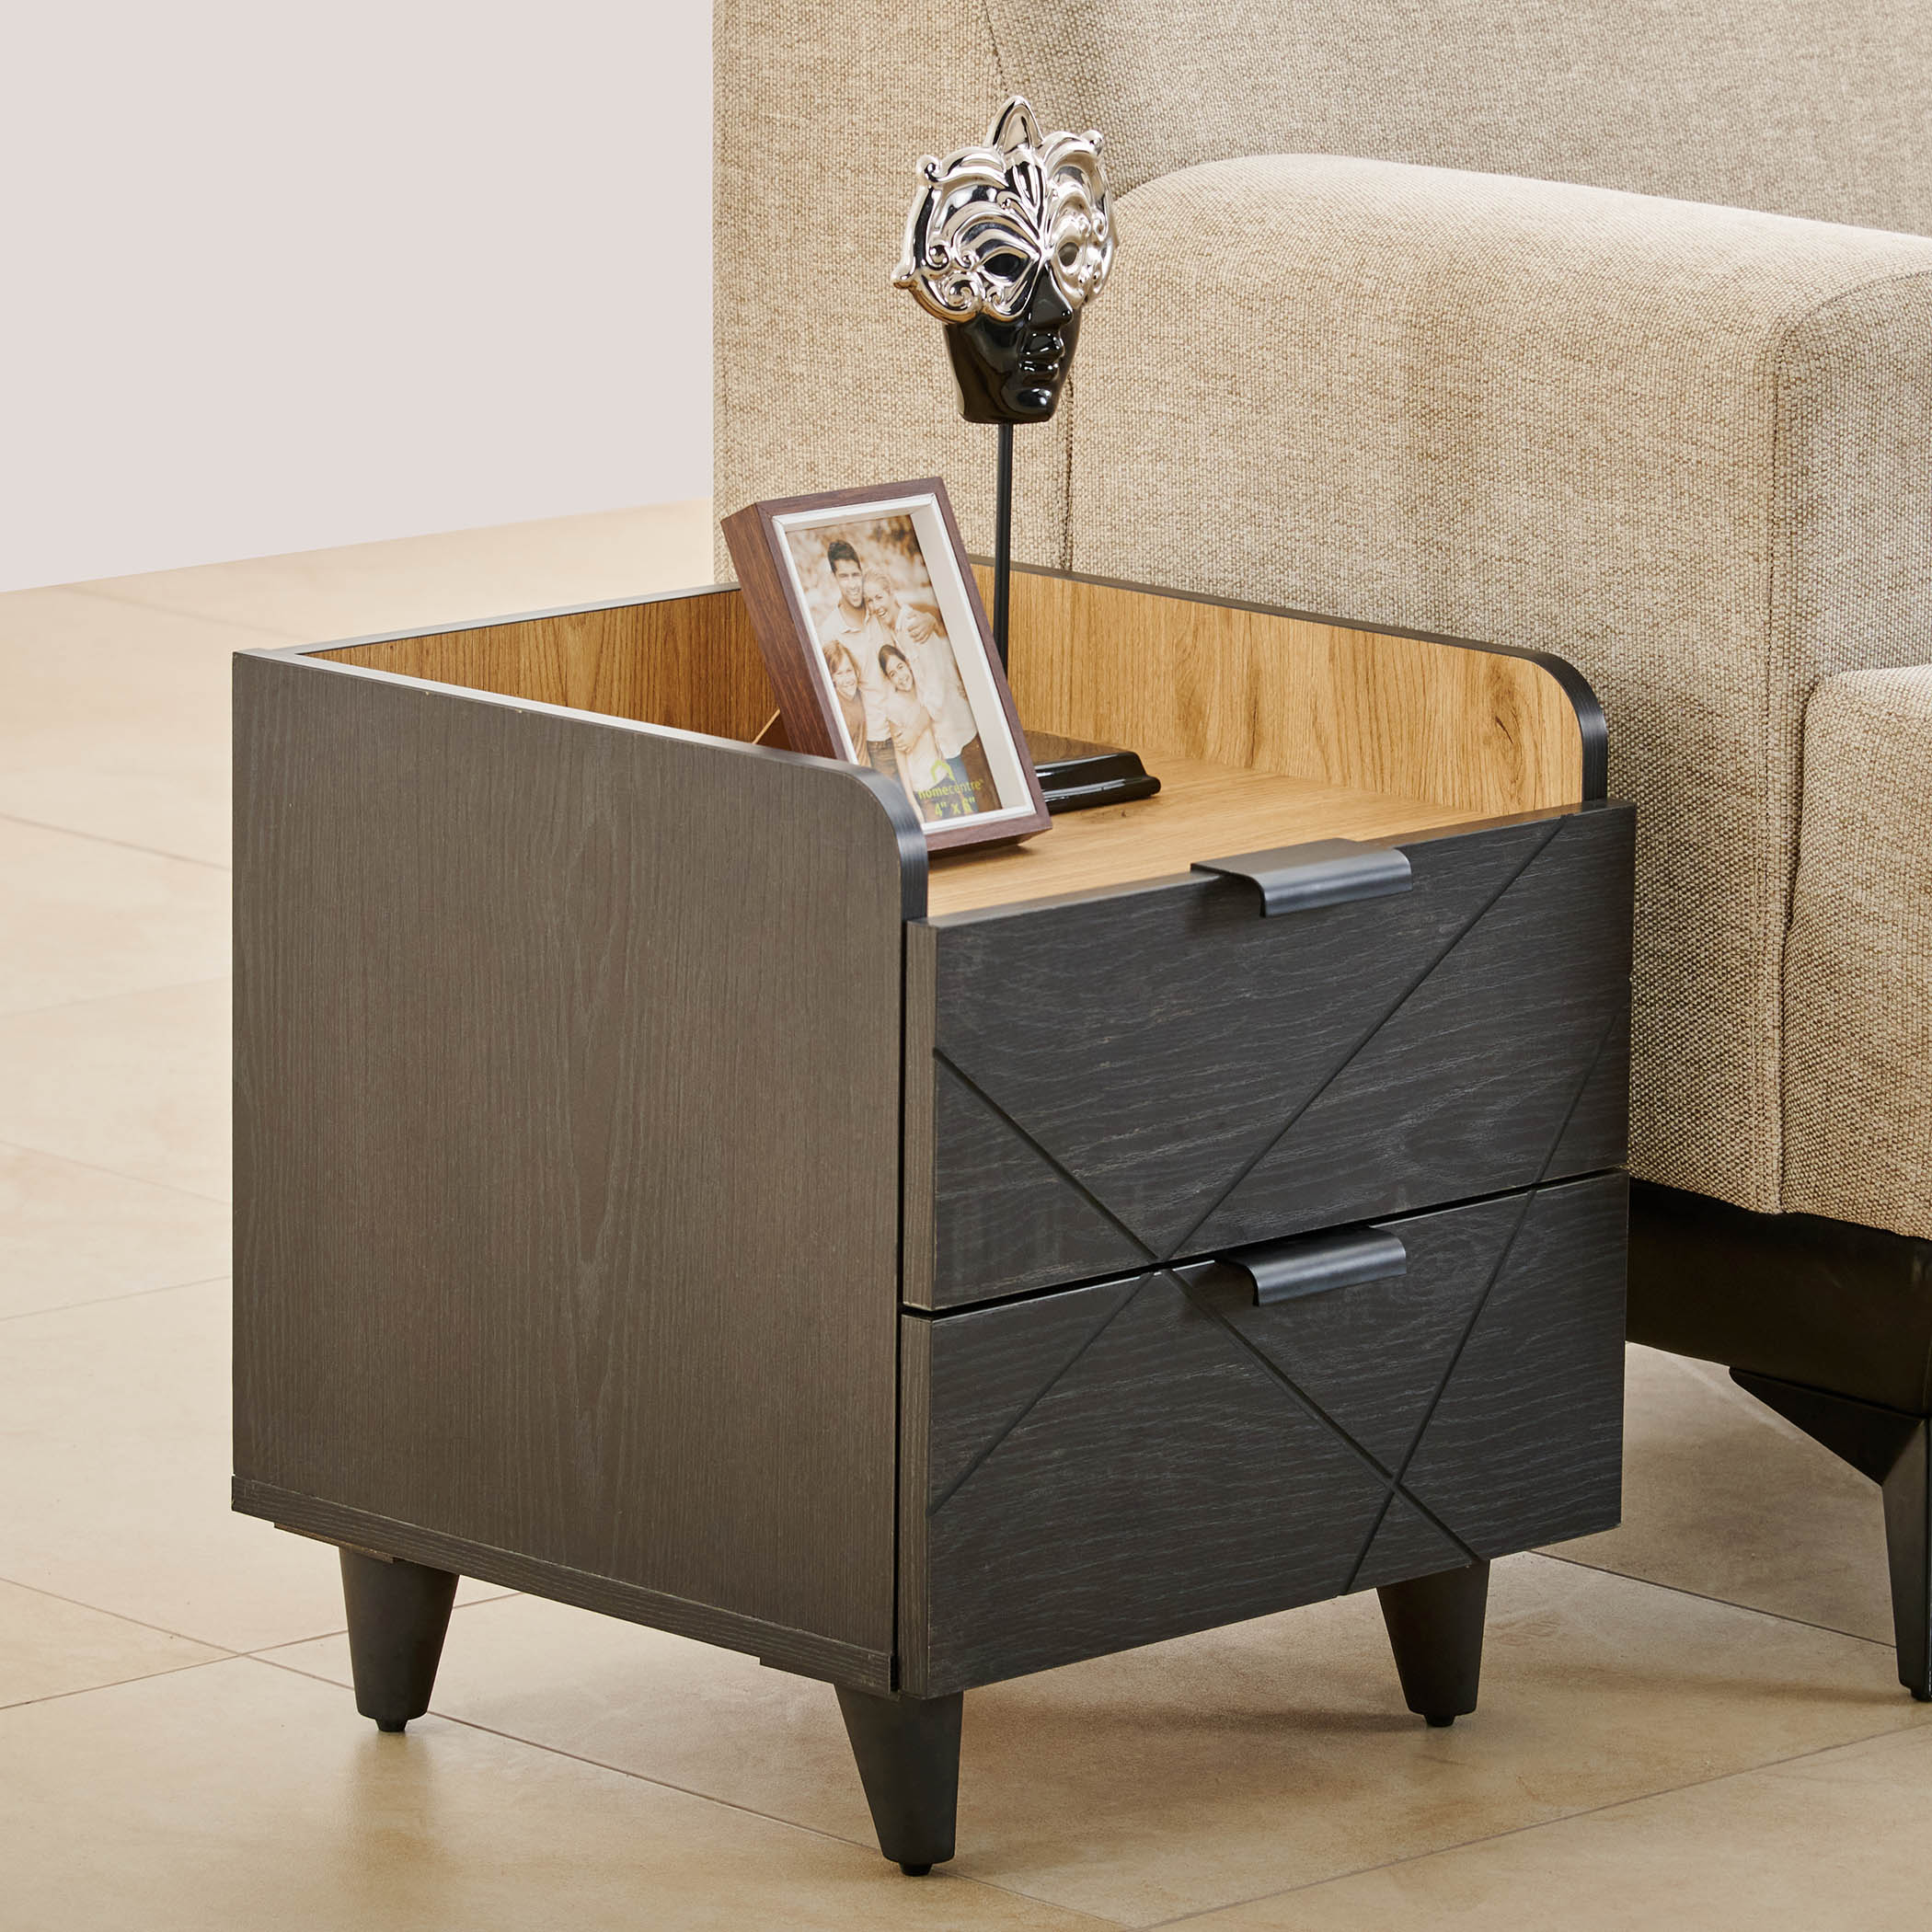 Kiro Bed Side Table with Drawer - Brown